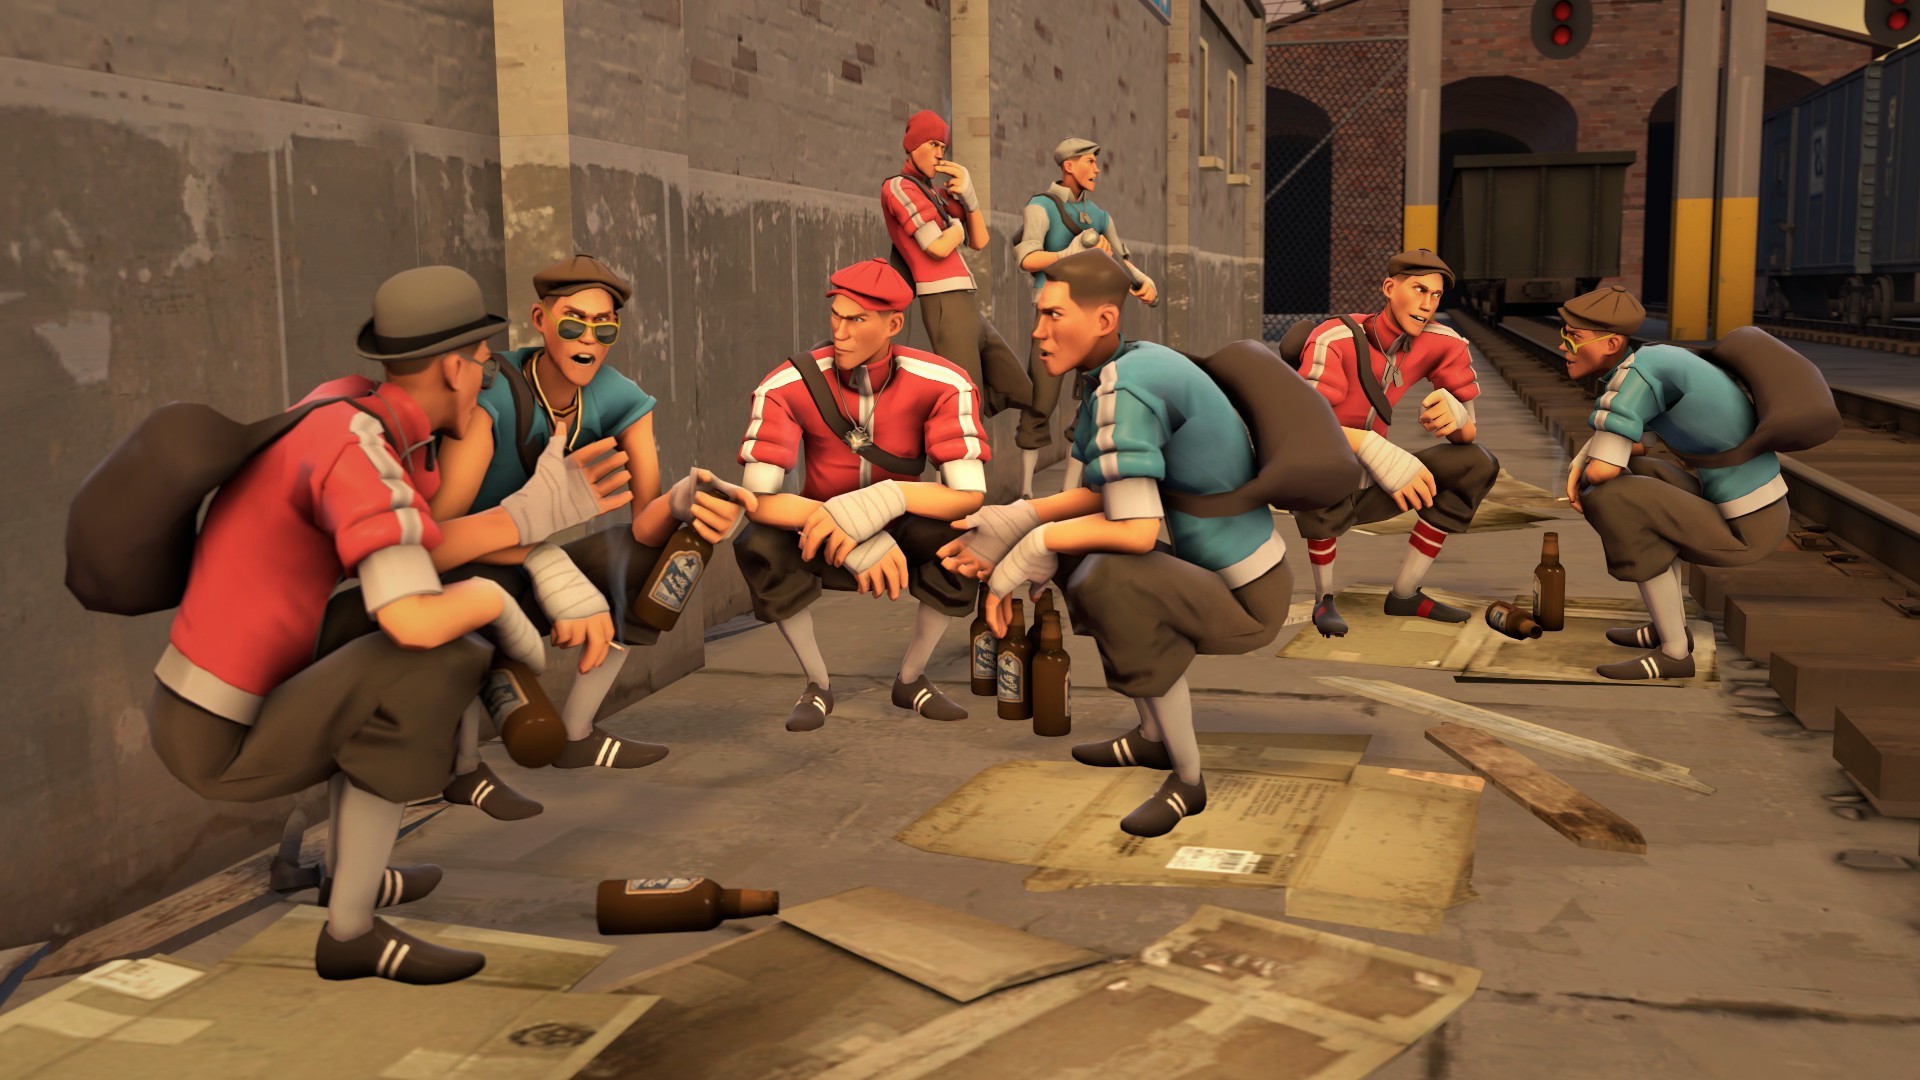 download team fortress 2 classic